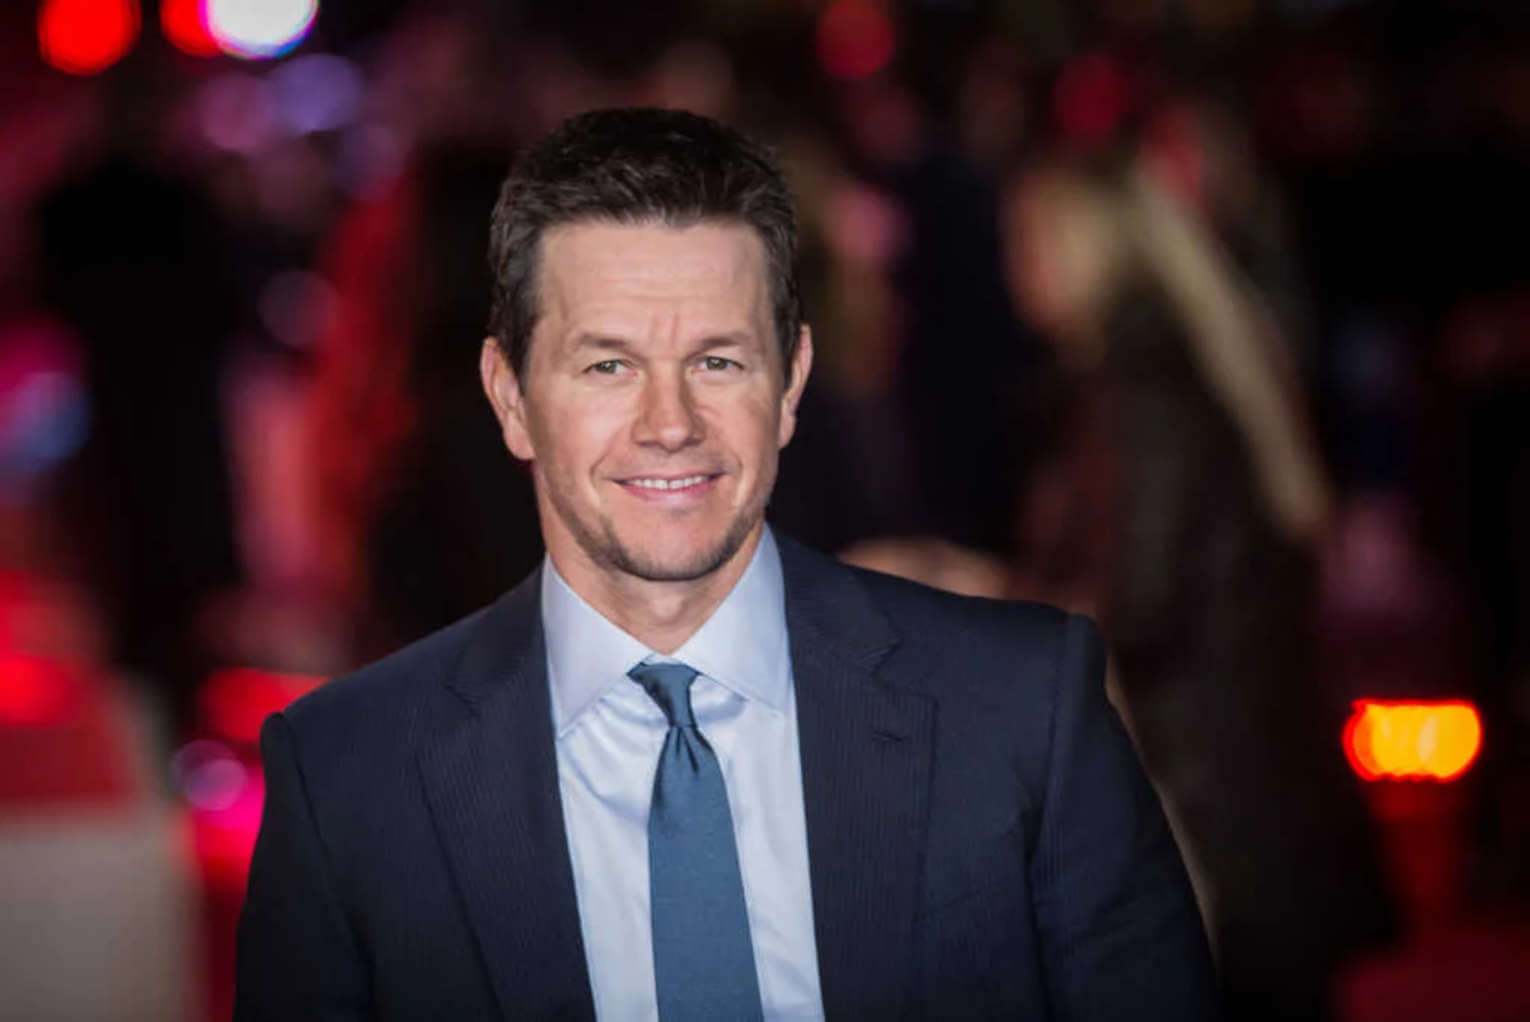 Mark Wahlberg Credits Faith for Success: ‘Stay Prayed Up’